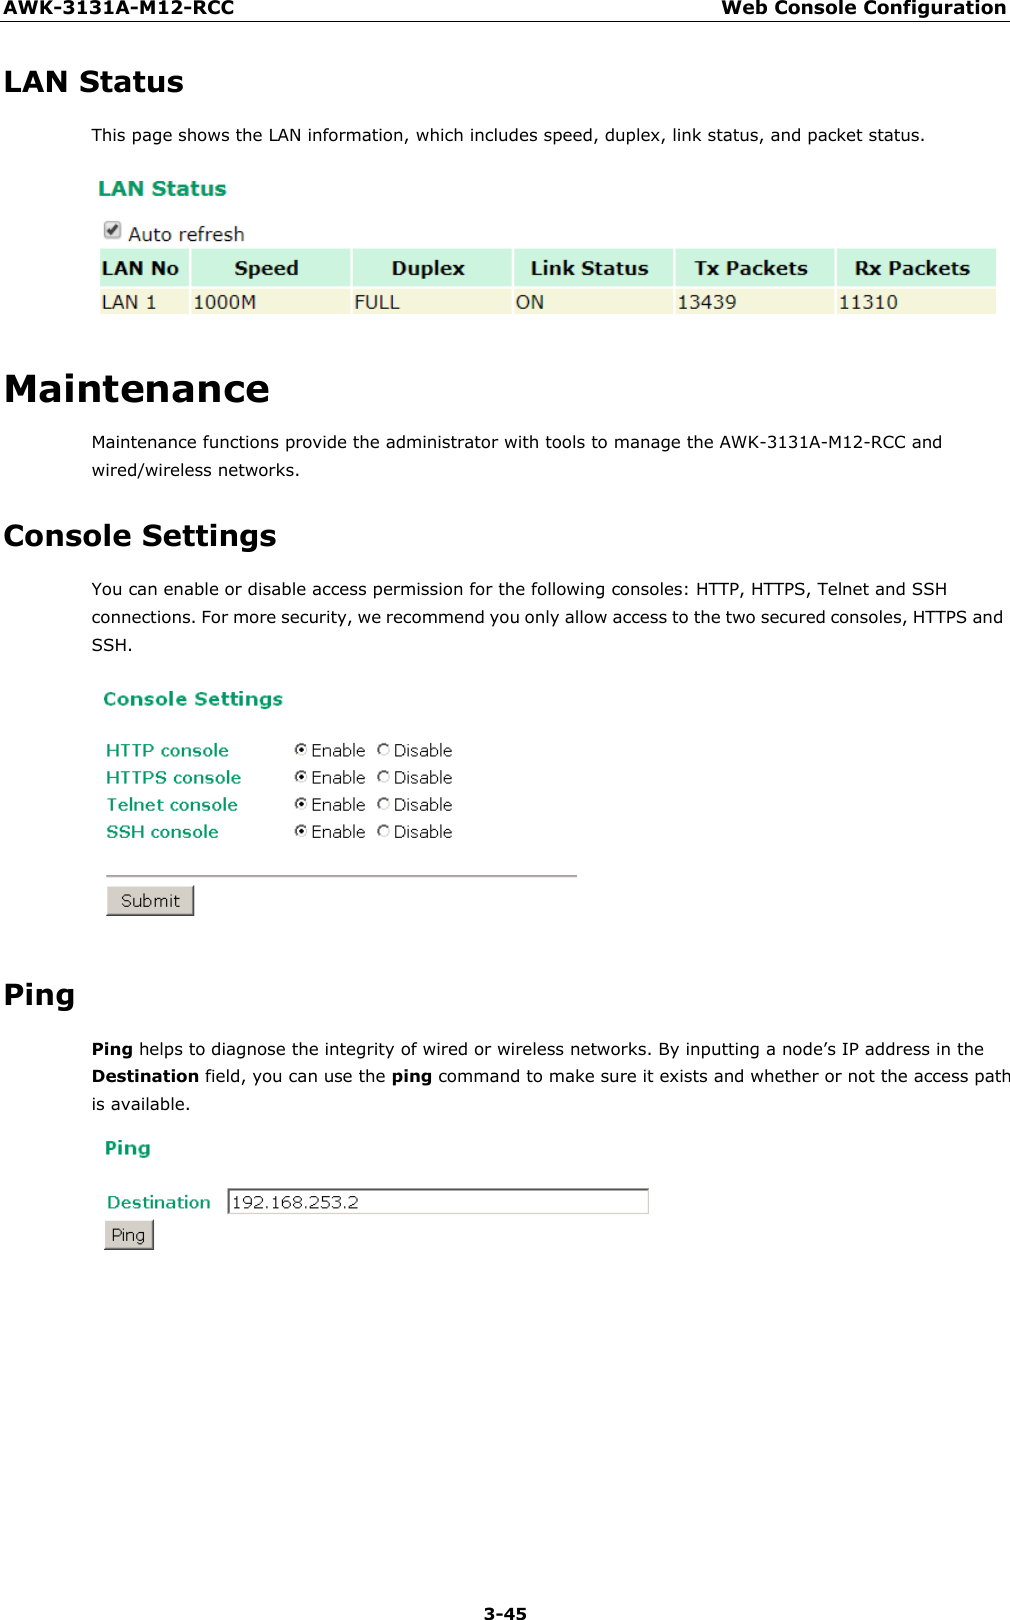 AWK-3131A-M12-RCC Web Console Configuration 3-45    LAN Status This page shows the LAN information, which includes speed, duplex, link status, and packet status.    Maintenance Maintenance functions provide the administrator with tools to manage the AWK-3131A-M12-RCC and wired/wireless networks.  Console Settings You can enable or disable access permission for the following consoles: HTTP, HTTPS, Telnet and SSH connections. For more security, we recommend you only allow access to the two secured consoles, HTTPS and SSH.    Ping Ping helps to diagnose the integrity of wired or wireless networks. By inputting a node’s IP address in the Destination field, you can use the ping command to make sure it exists and whether or not the access path is available.  